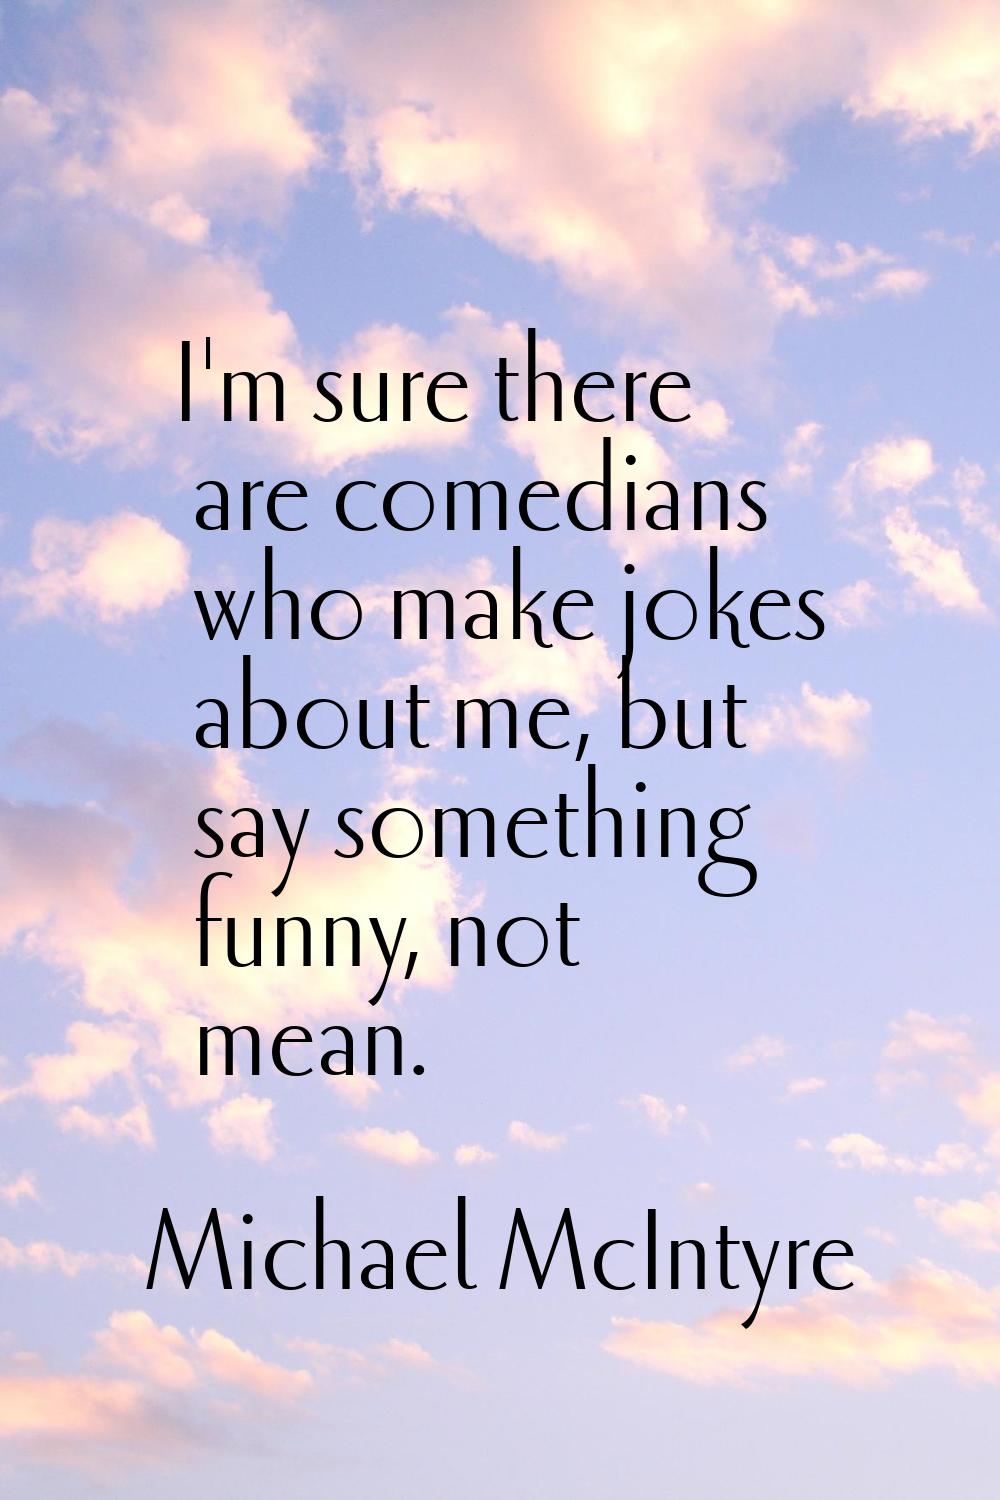 I'm sure there are comedians who make jokes about me, but say something funny, not mean.